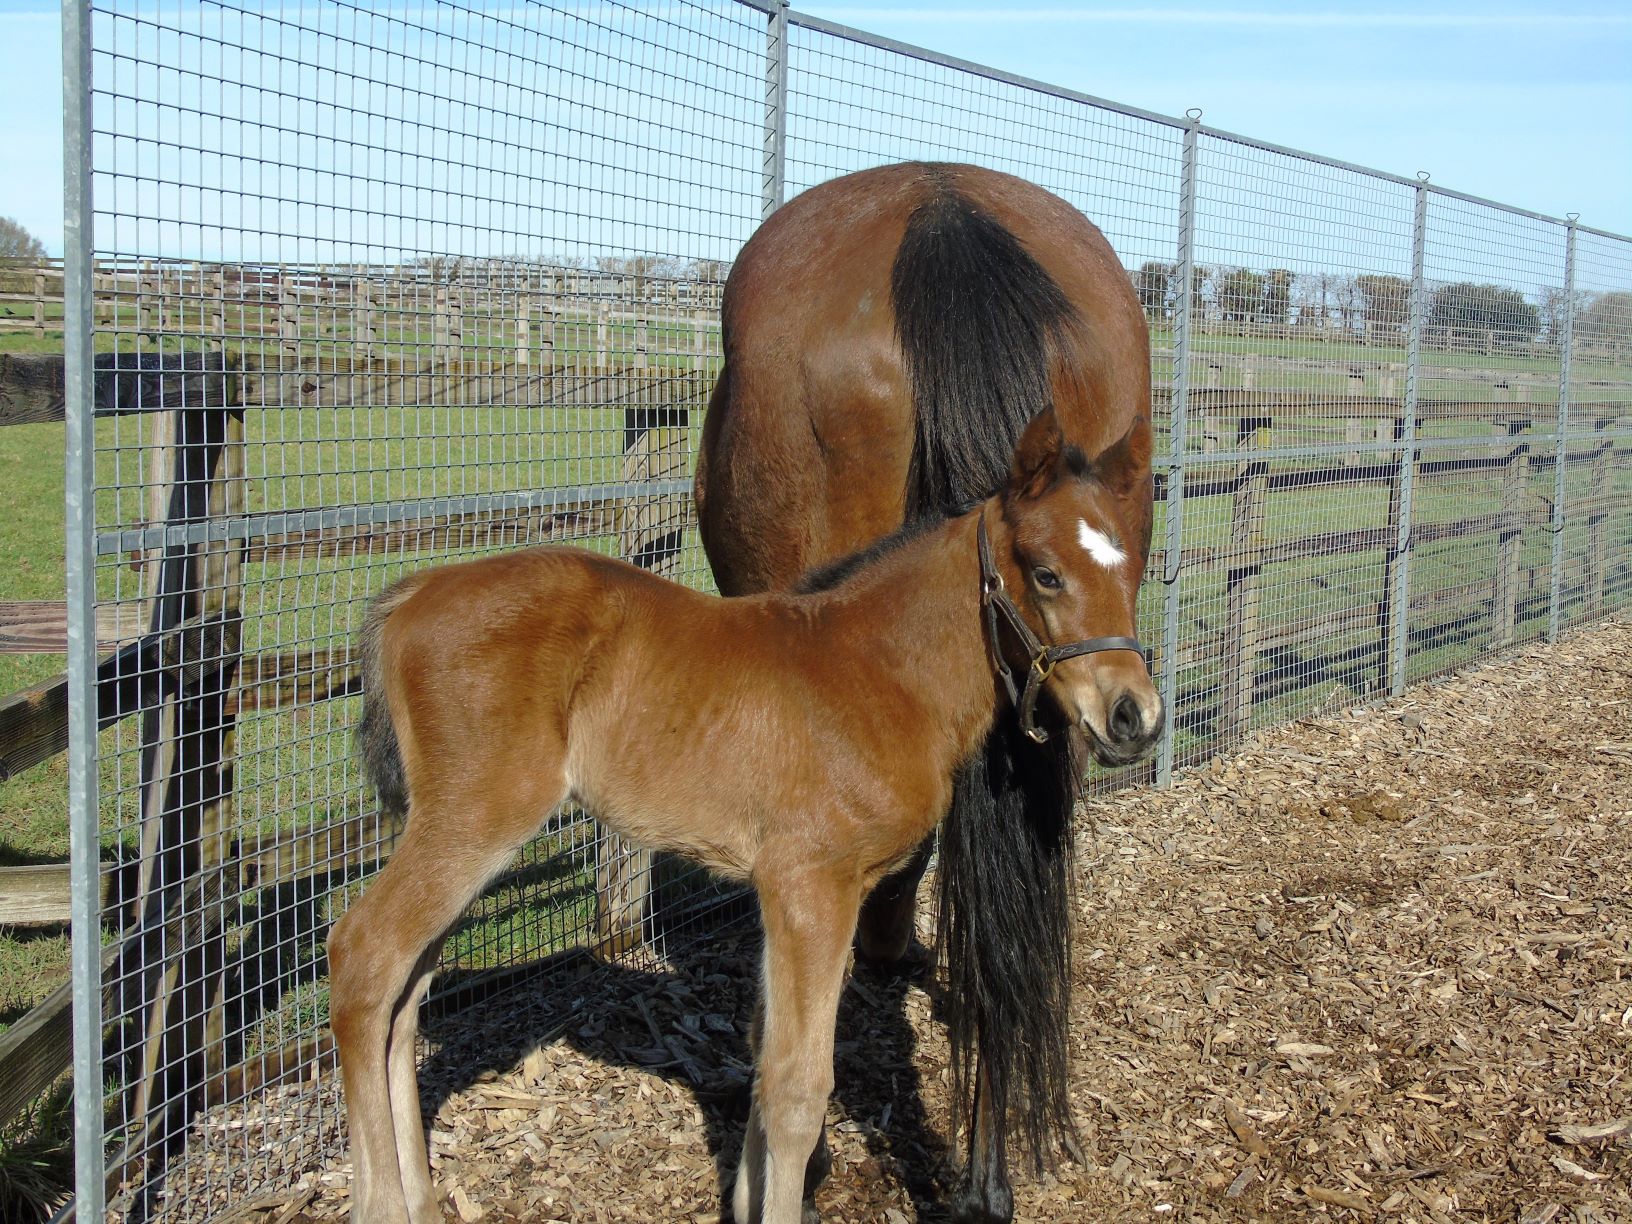 2021 filly by Dubawi